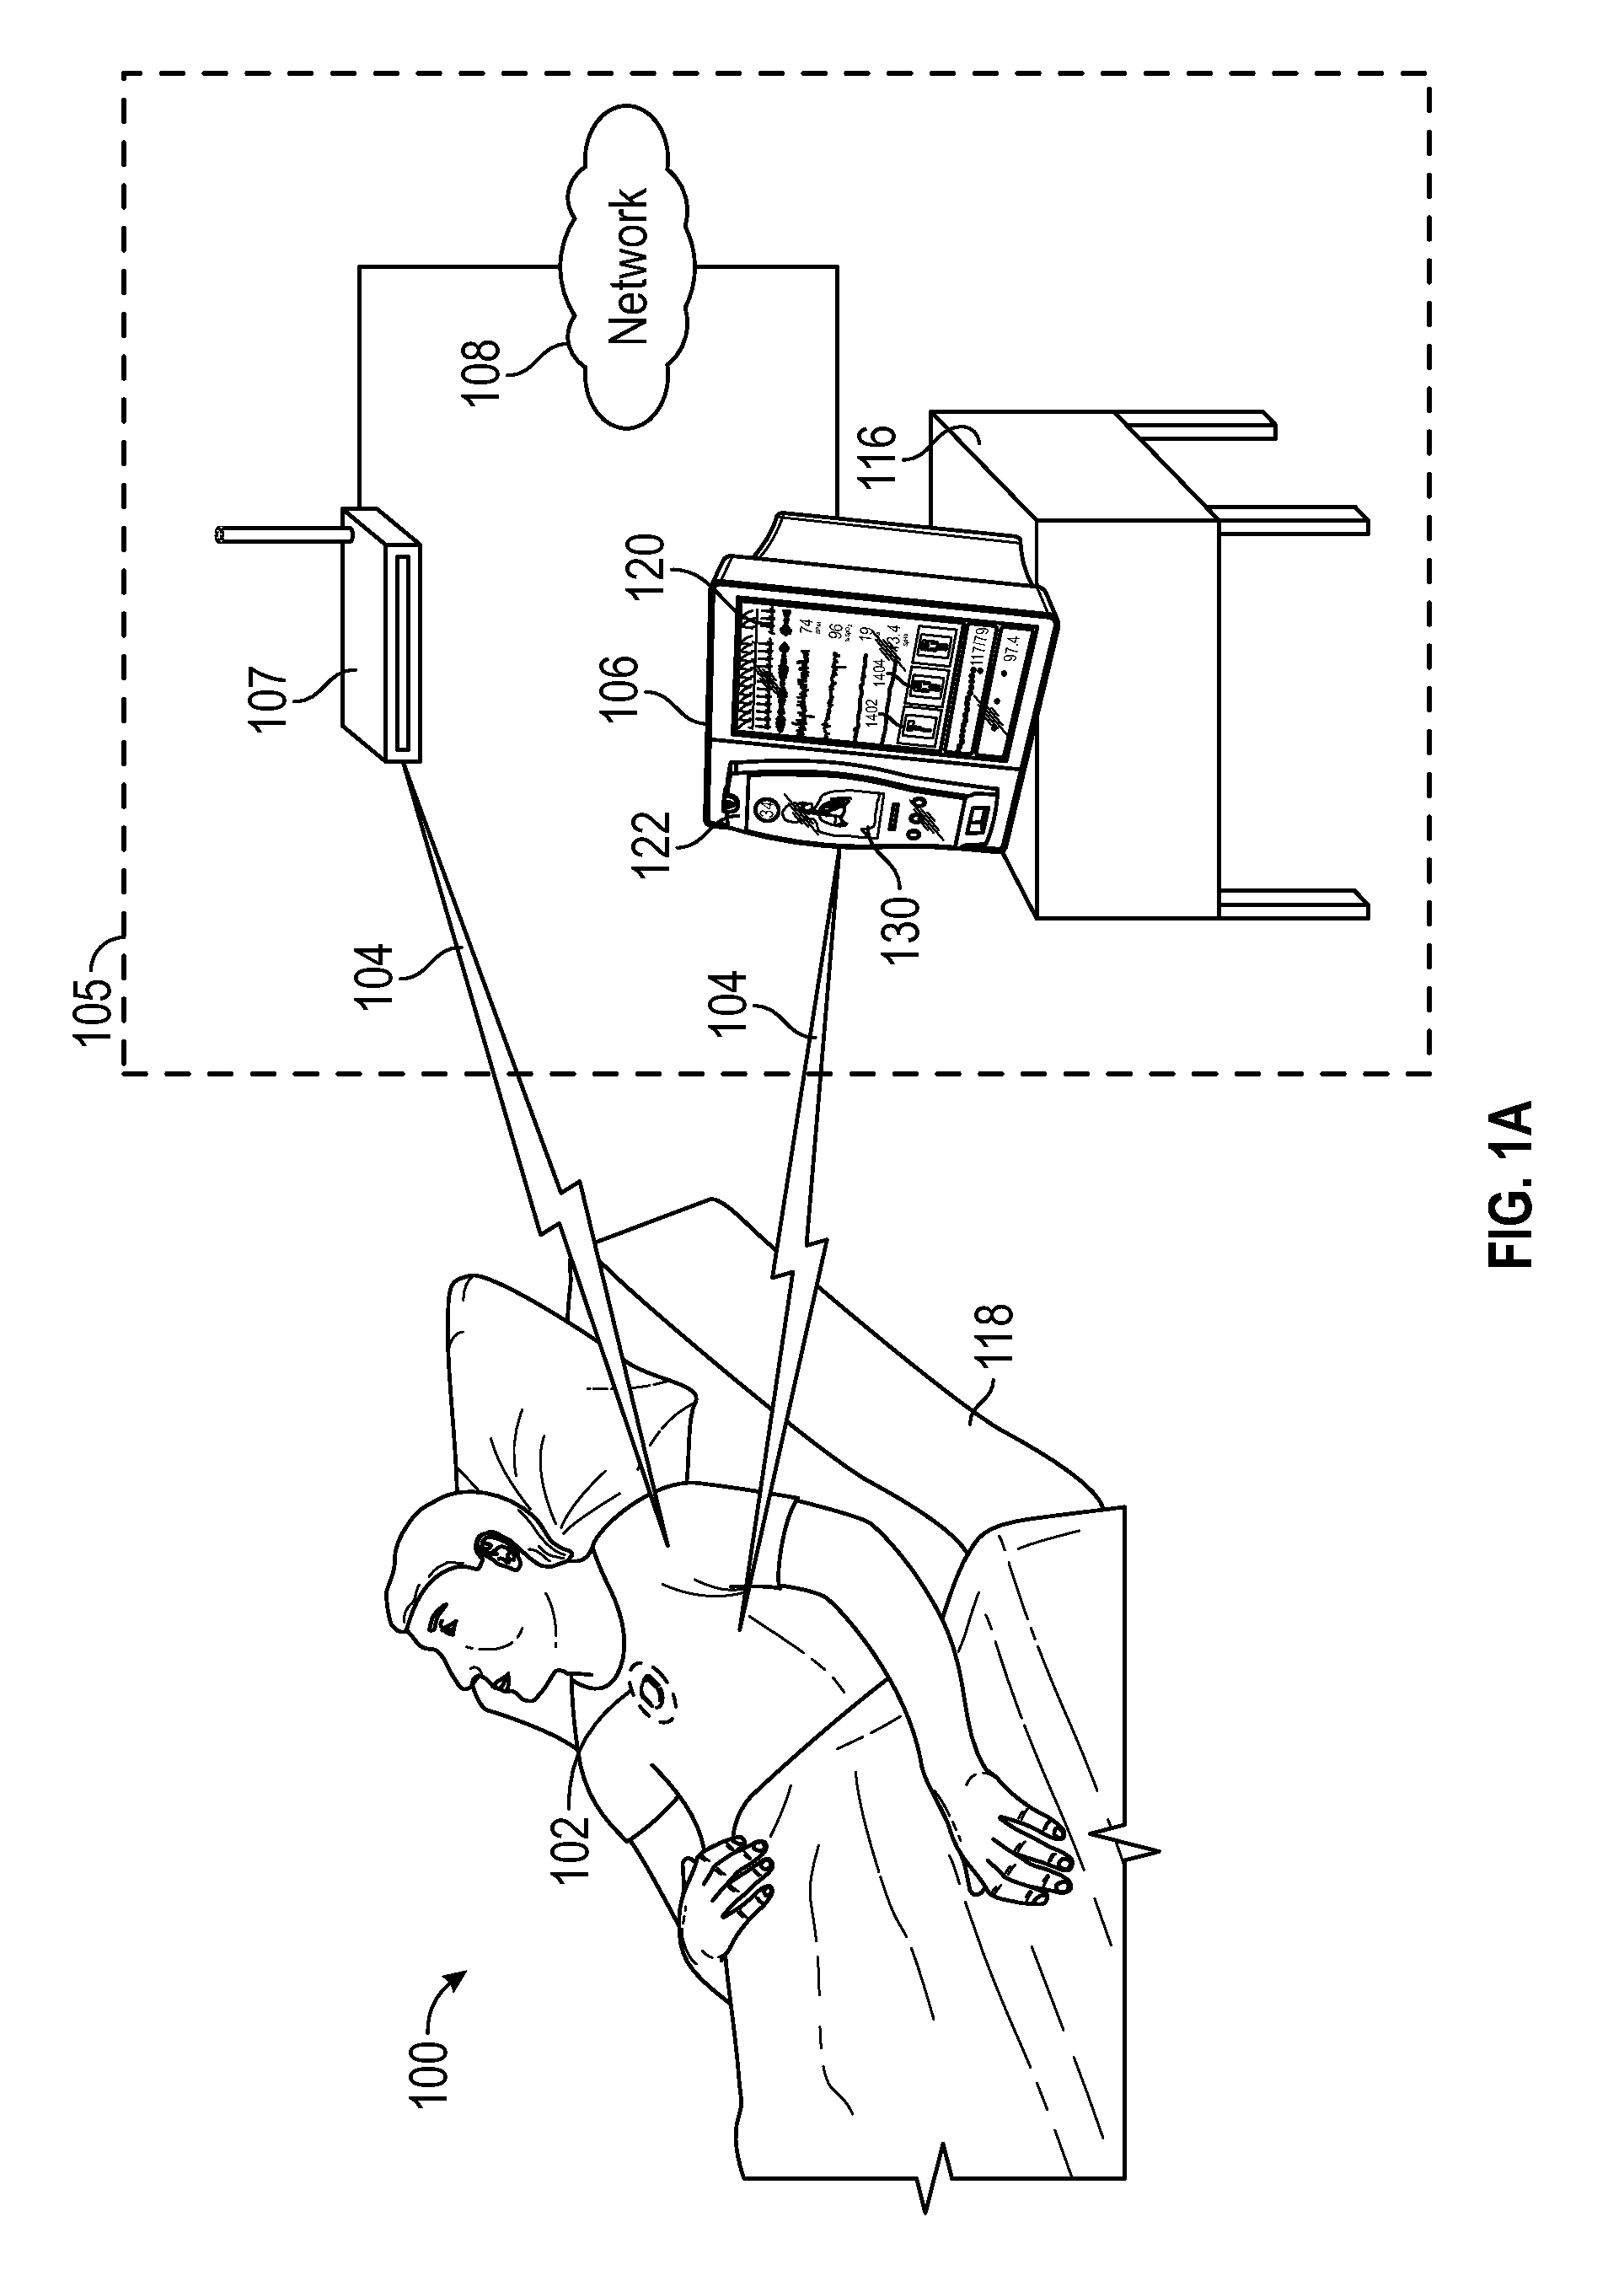 Wireless patient monitoring systems and methods